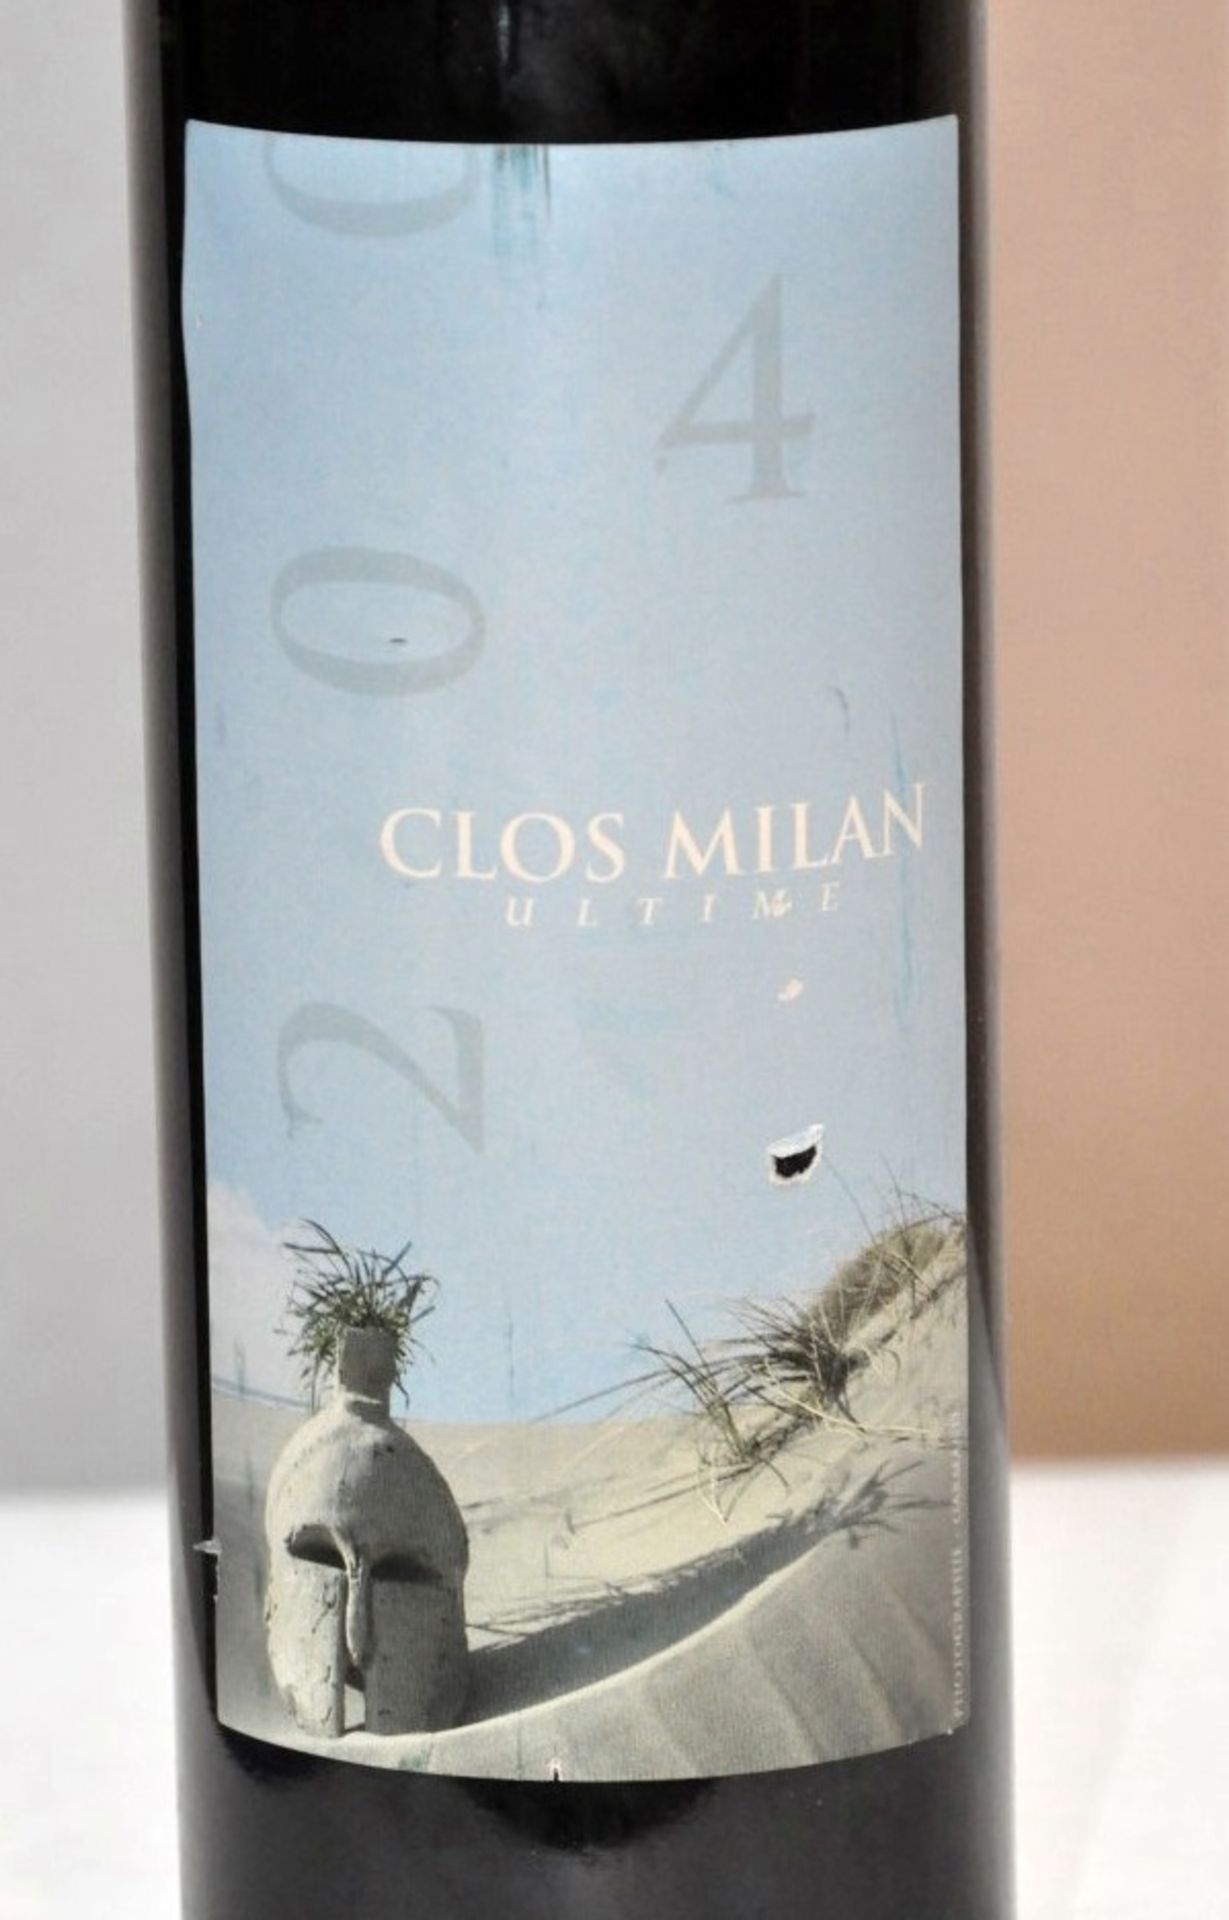 2 x Clos Milan Ultime Red - Henri Milan, Provence – French Wine – 2004 – 75cl Bottle - Volume - Image 3 of 3